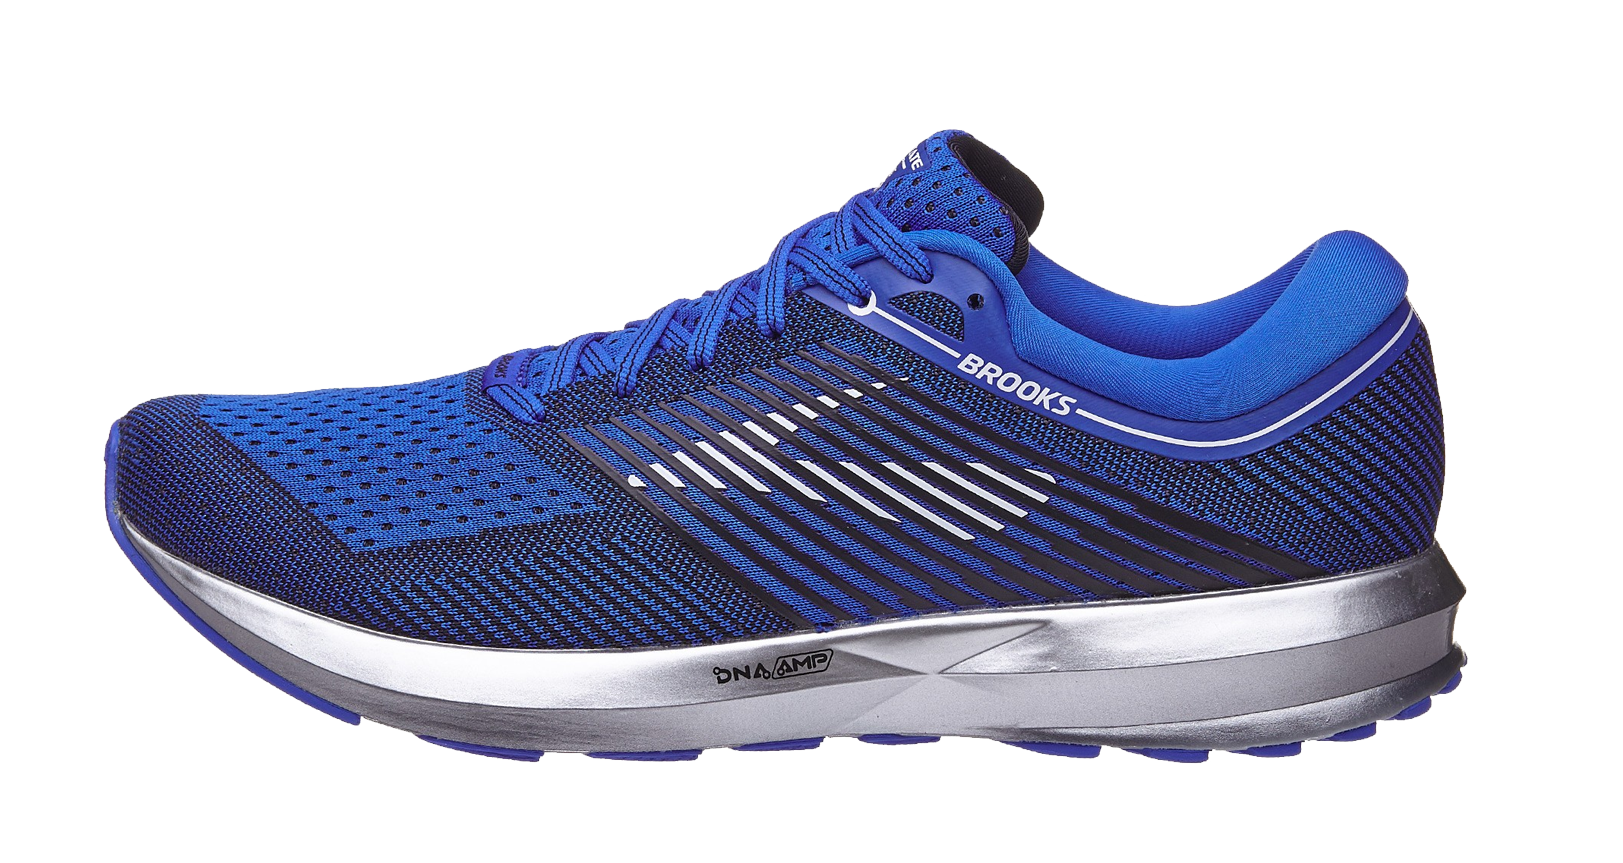 brooks levitate running shoes review